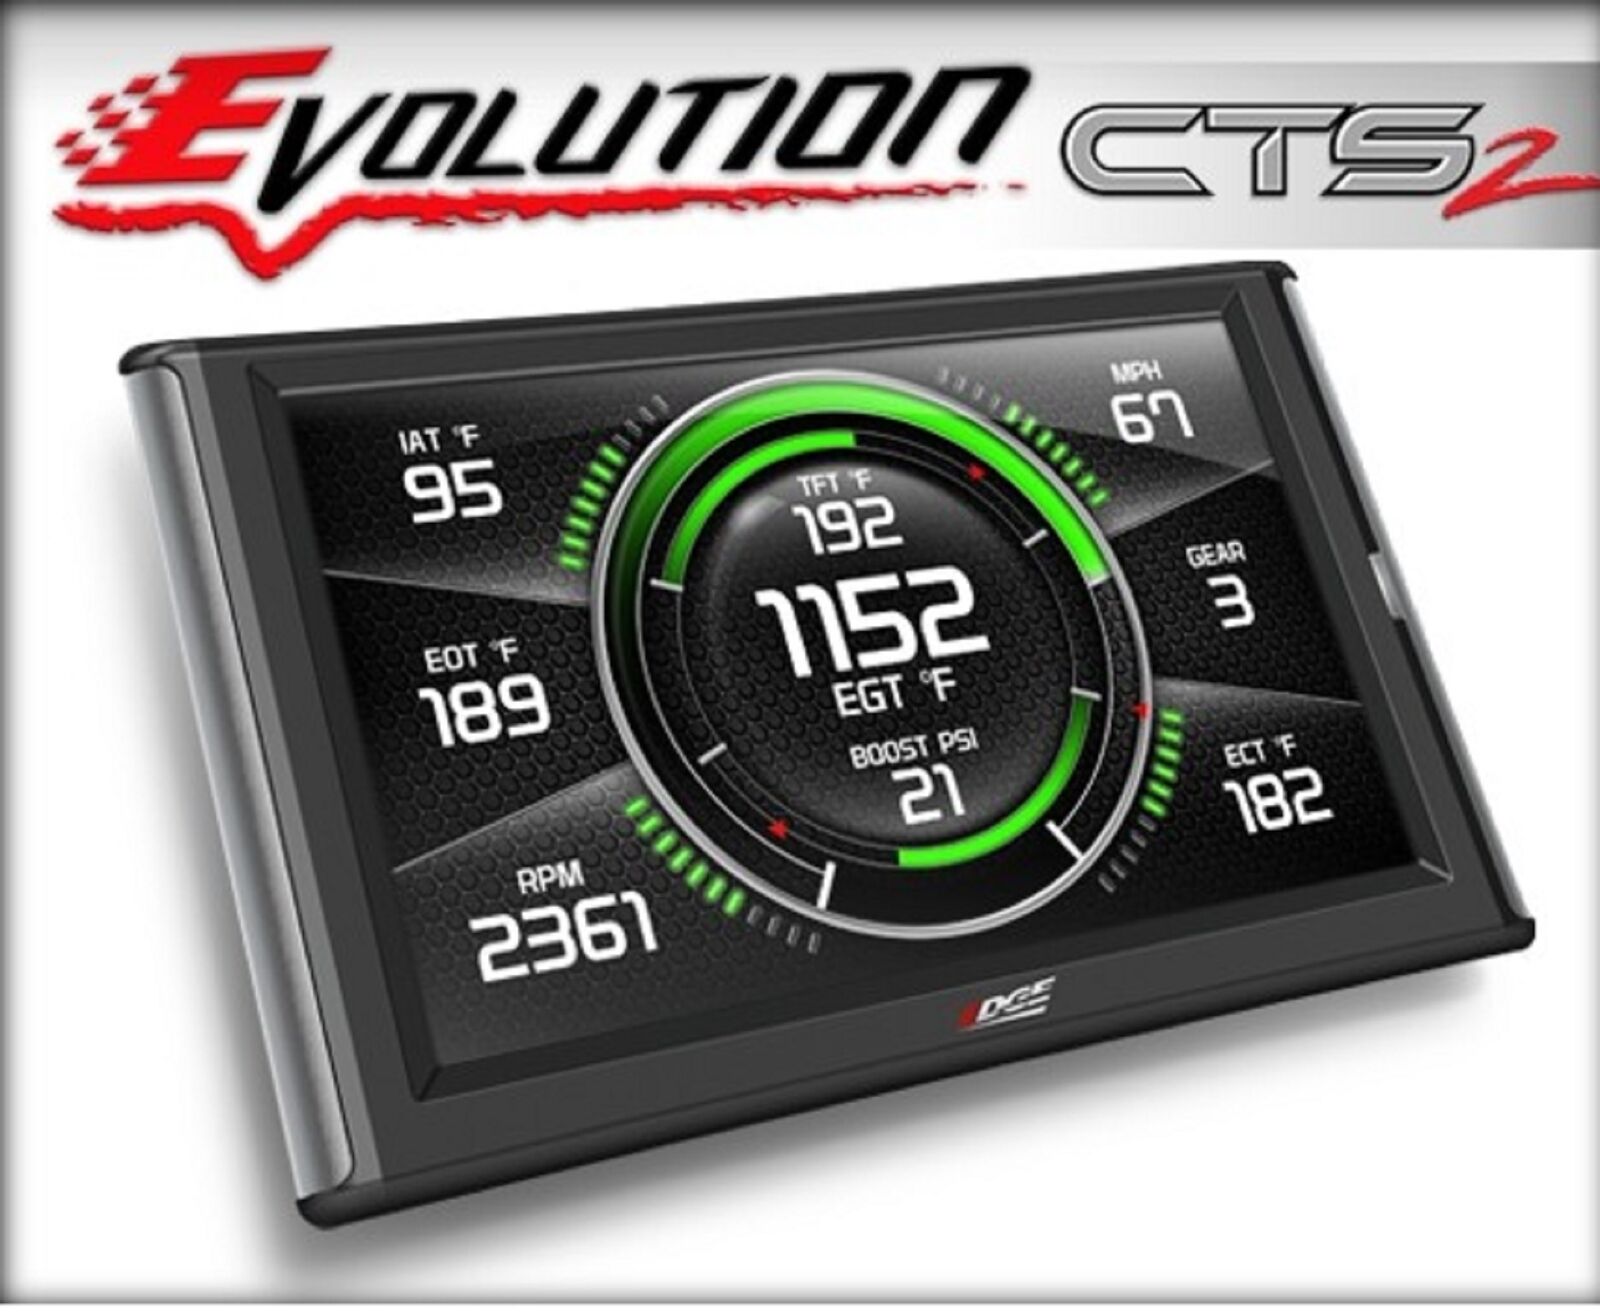 EDGE 85450 Evolution Programmer and CTS2 Monitor w/ Mount for Gas Engines